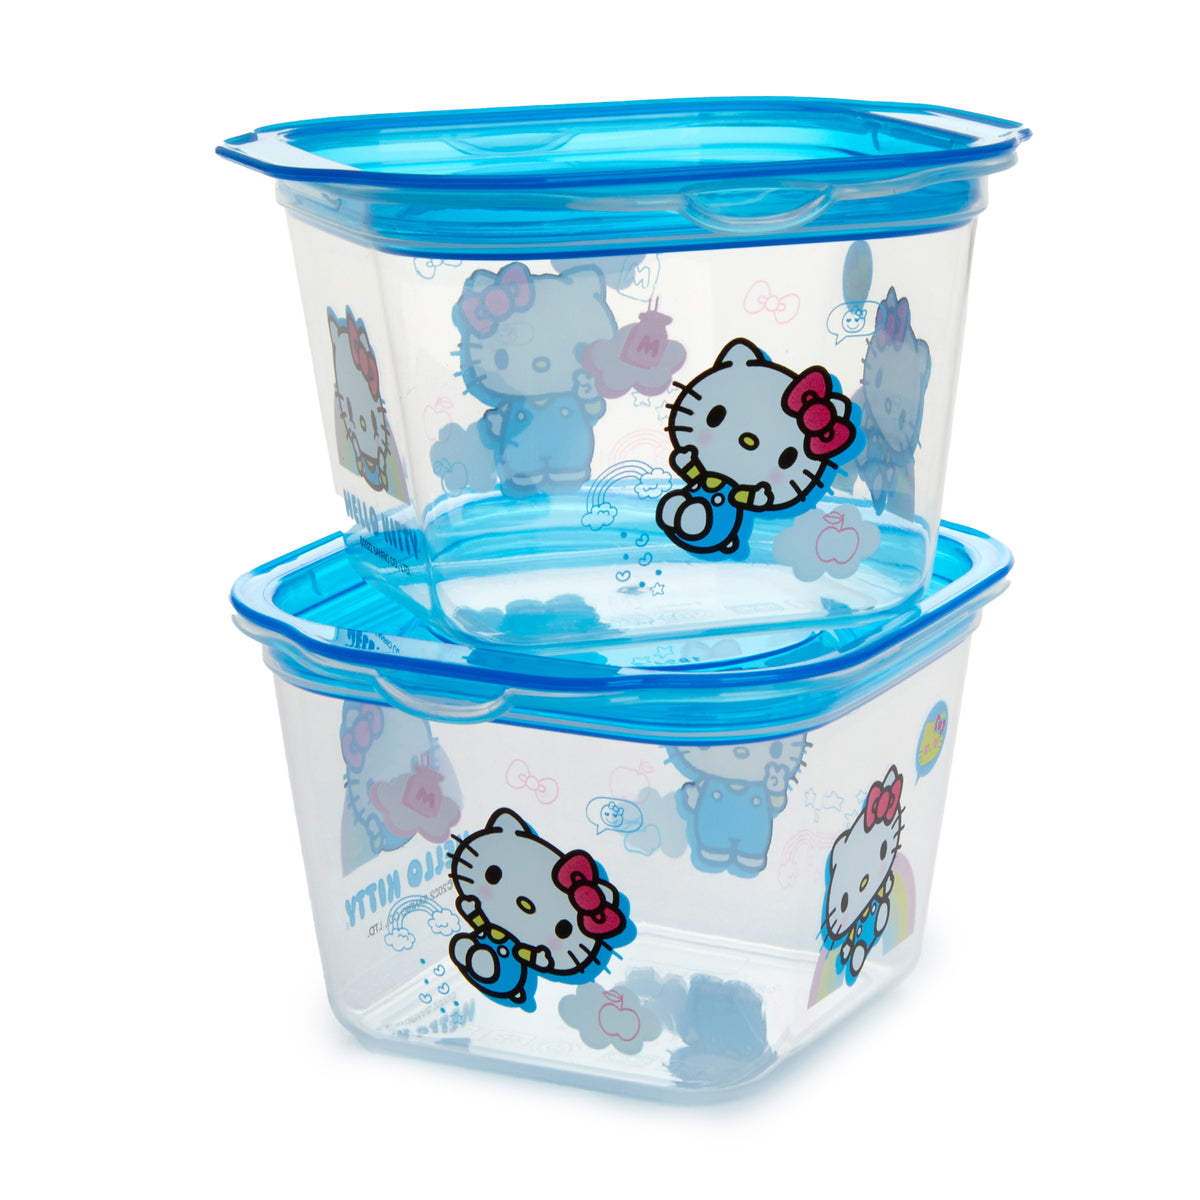 This Food Storage Container Set Is on Sale at